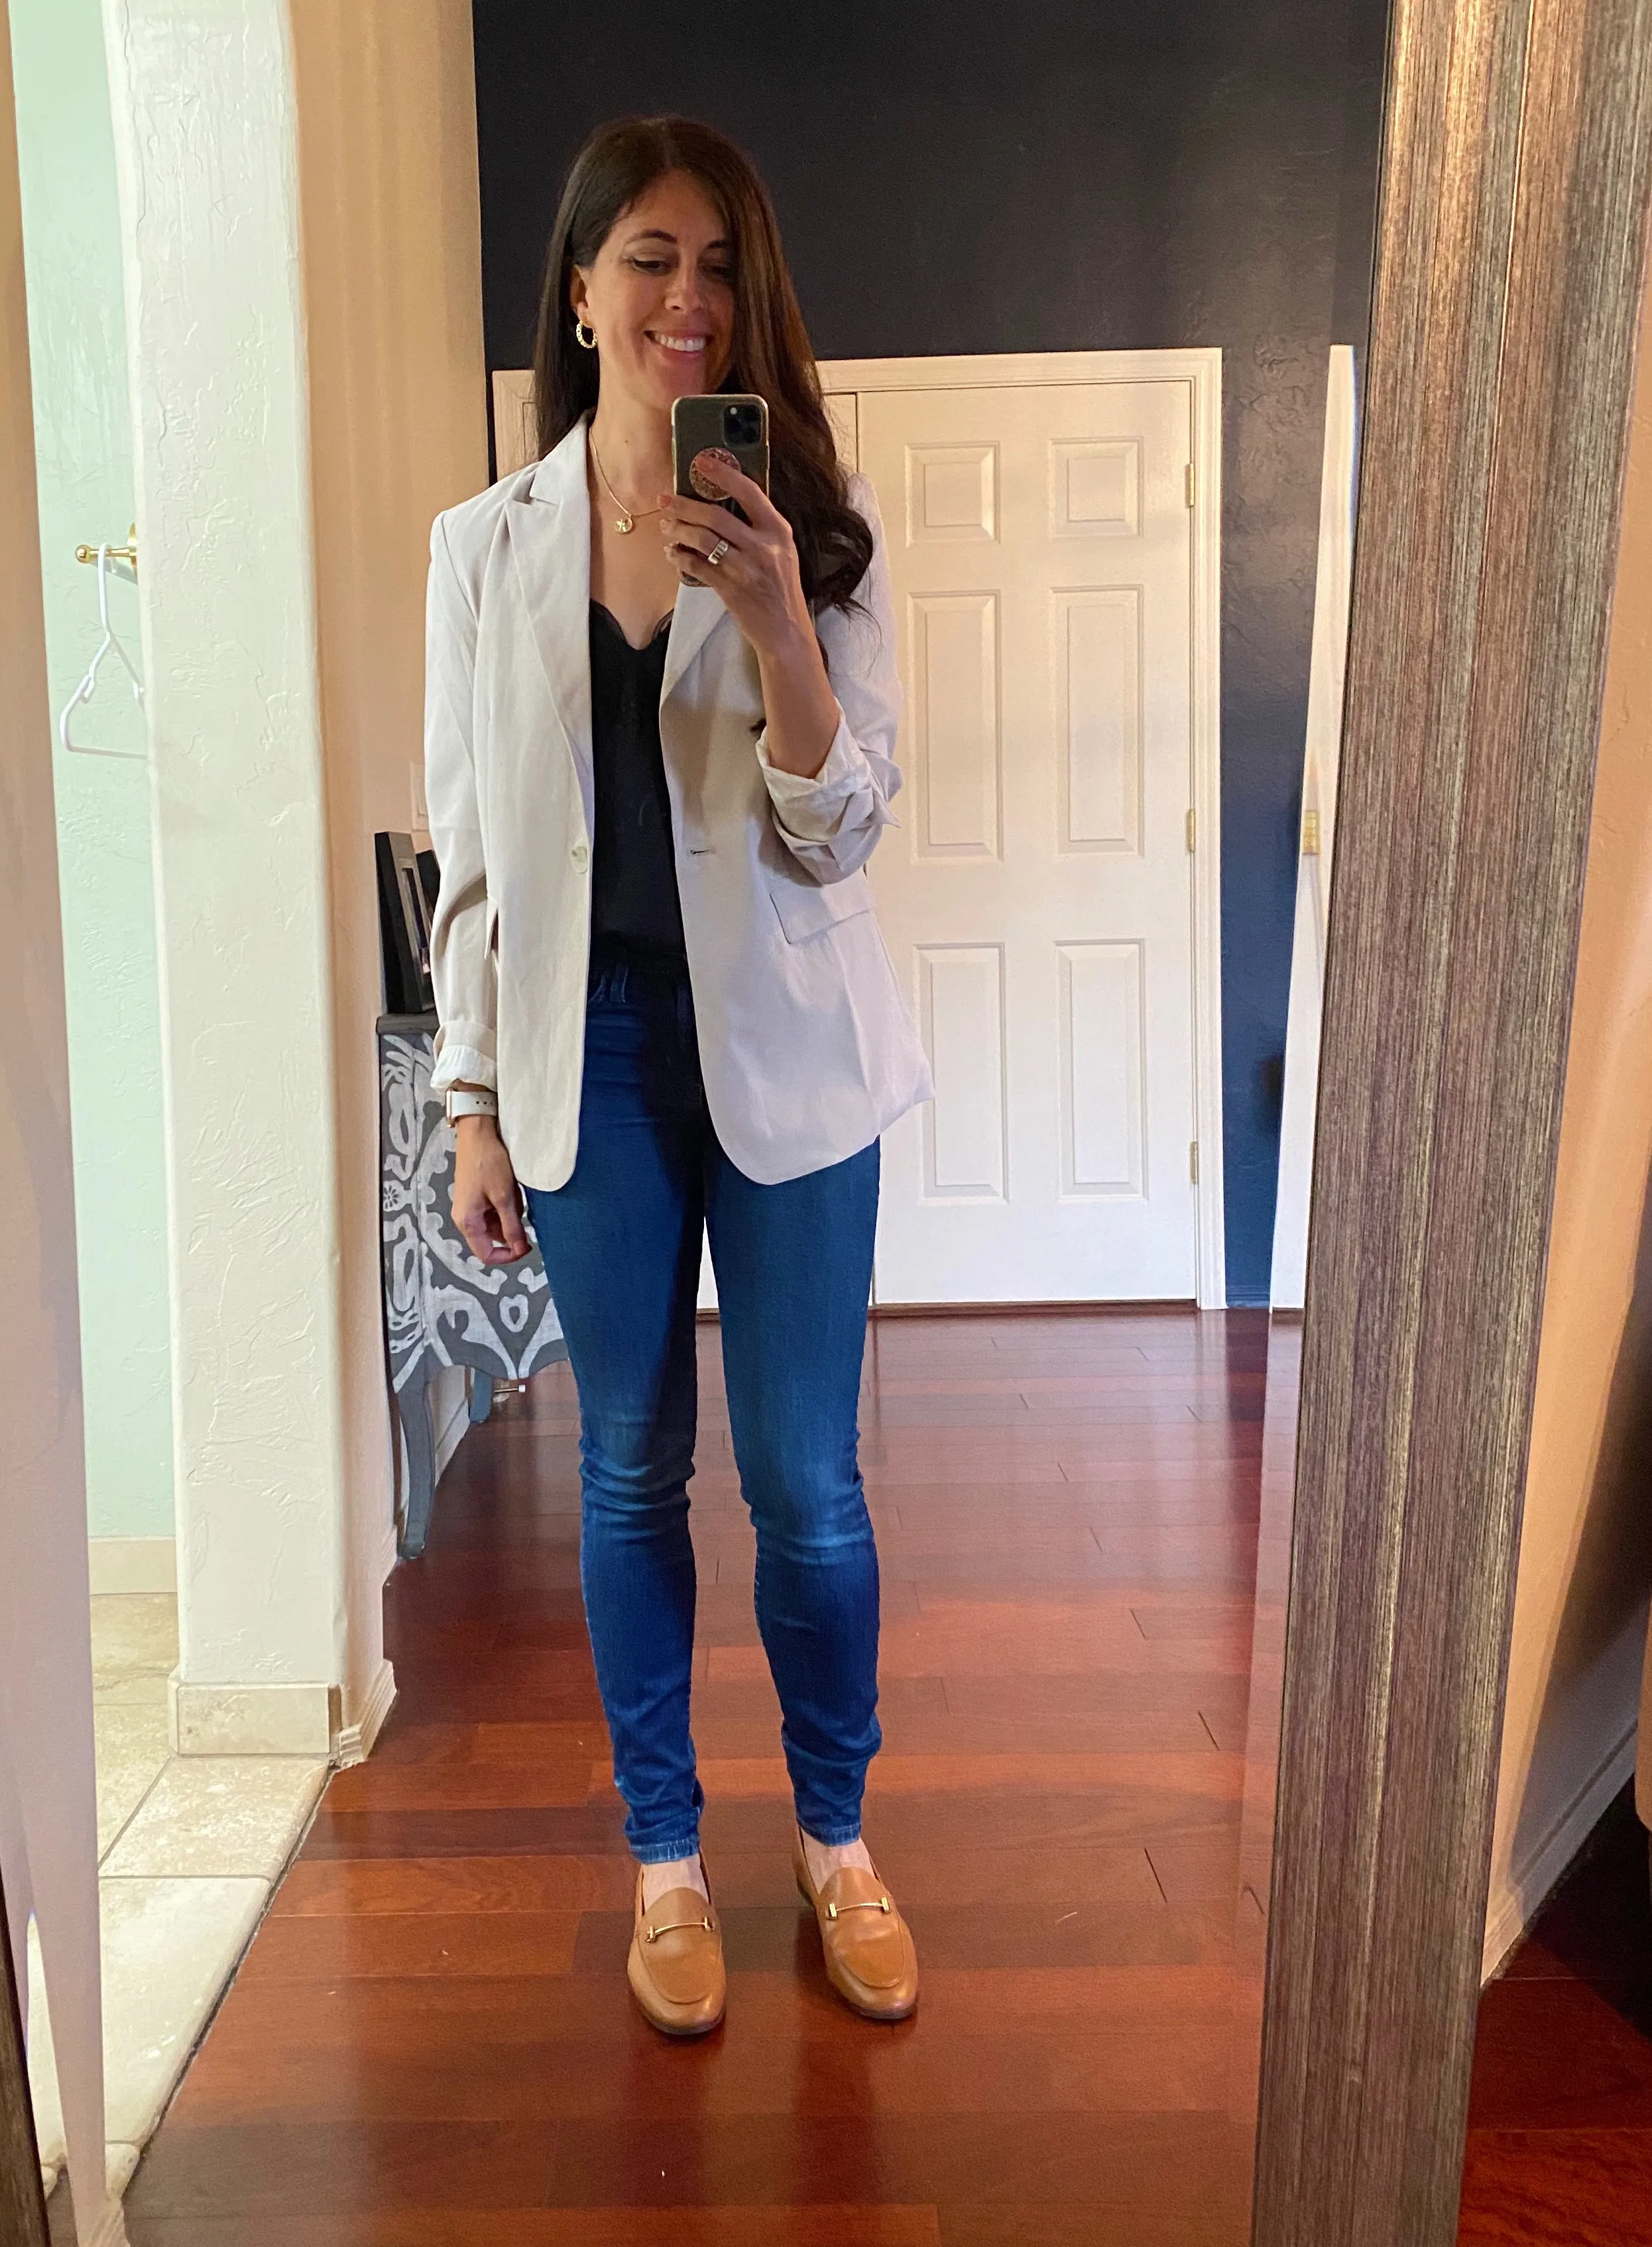 blazer and jeans outfit